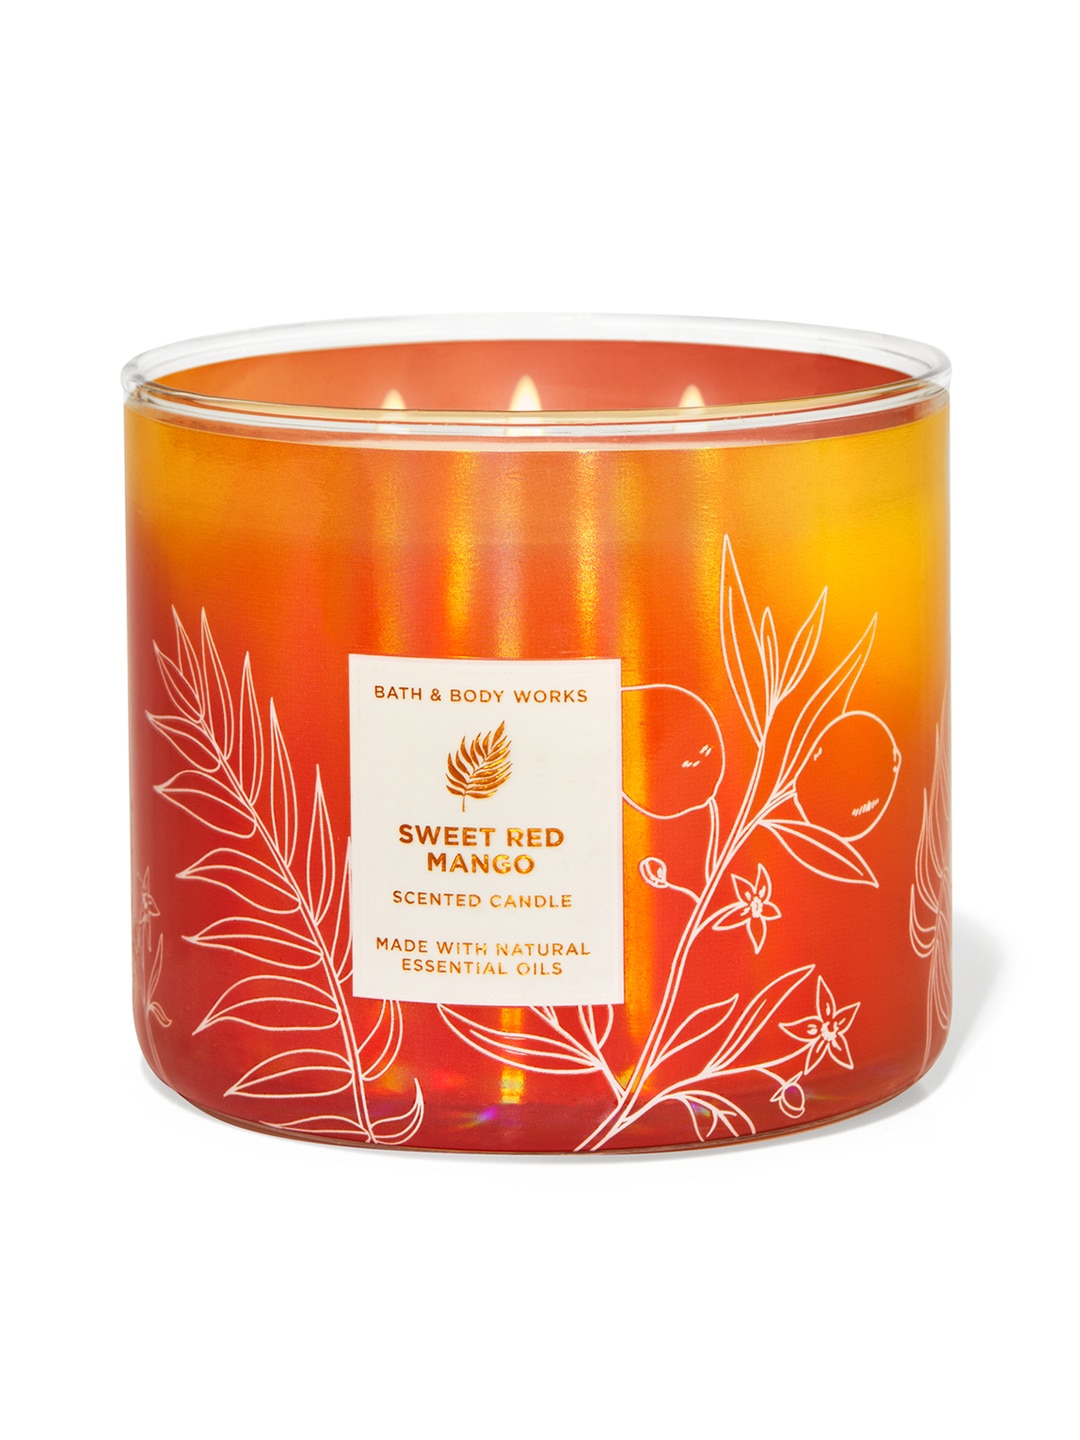 Bath & Body Works Sweet Red Mango 3-Wick Scented Candle - 411 g Price in India